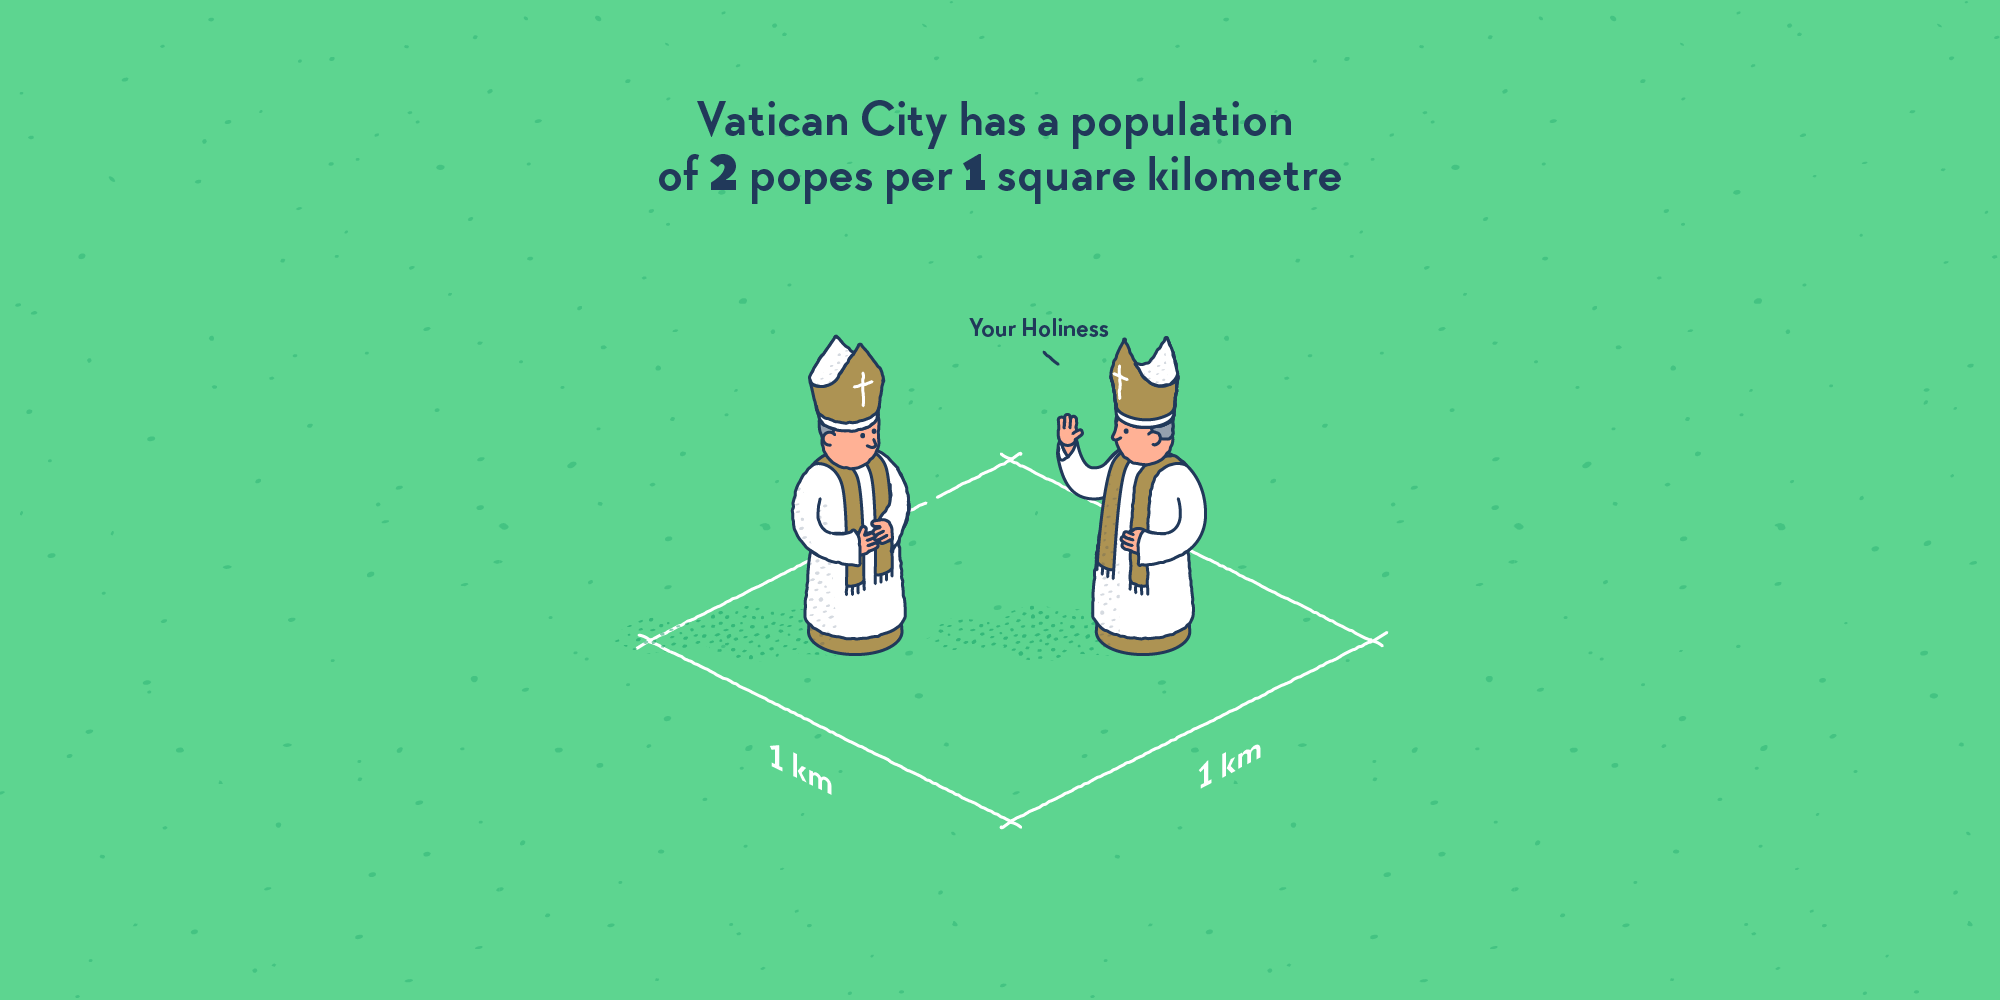 A one kilometre sided square, two identical popes standing face to face in its centre. “Your Holiness”, greets the pope to the other pope.